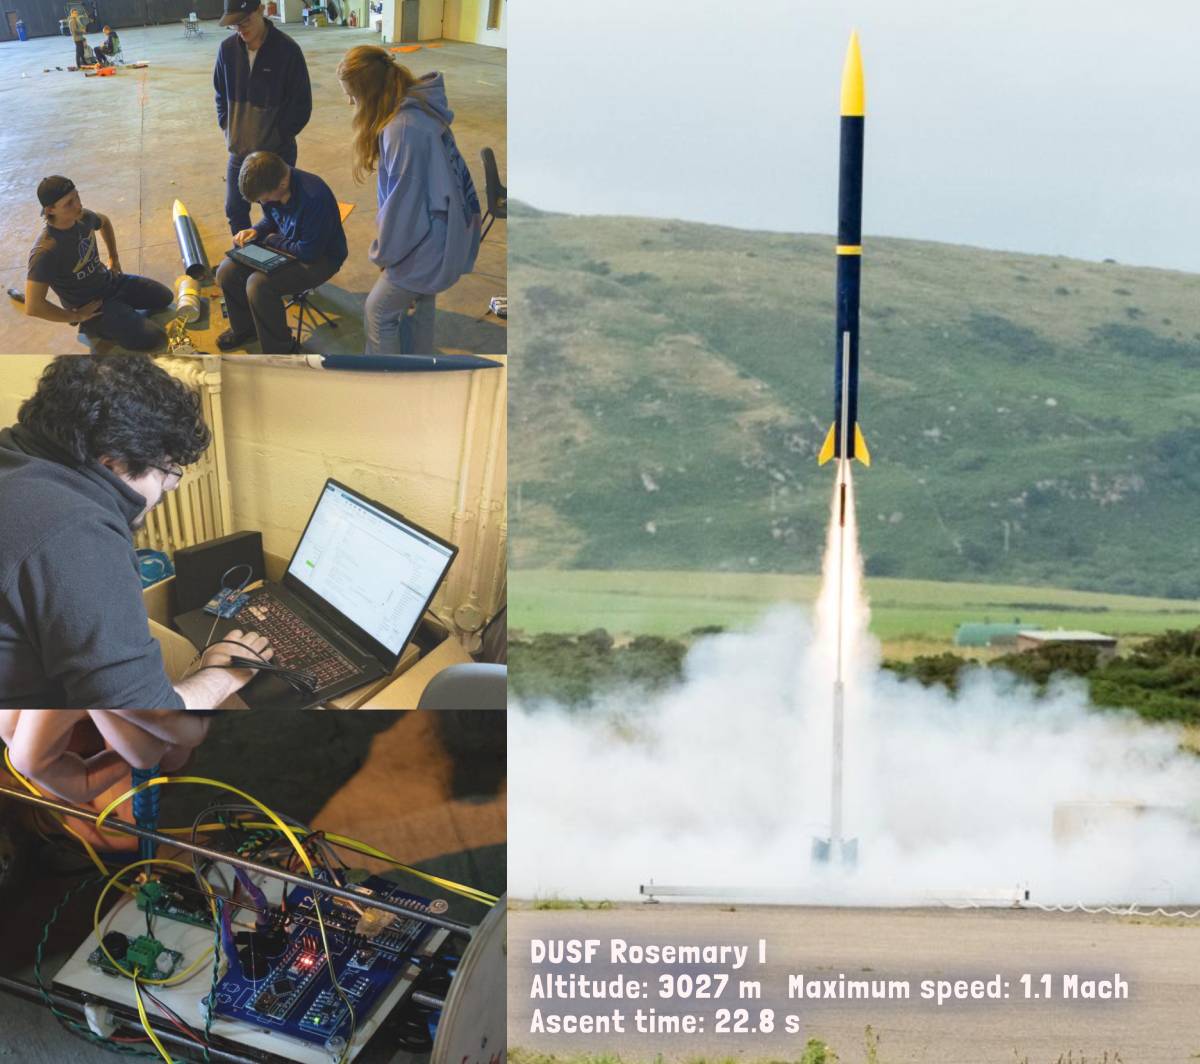 A collage featuring students working on the Rosemary I rocket in an indoor space, alongside an image of the rocket launching with smoke, and text displaying launch statistics: altitude 3027 m, maximum speed 1.1 Mach, ascent time 22.8 s.